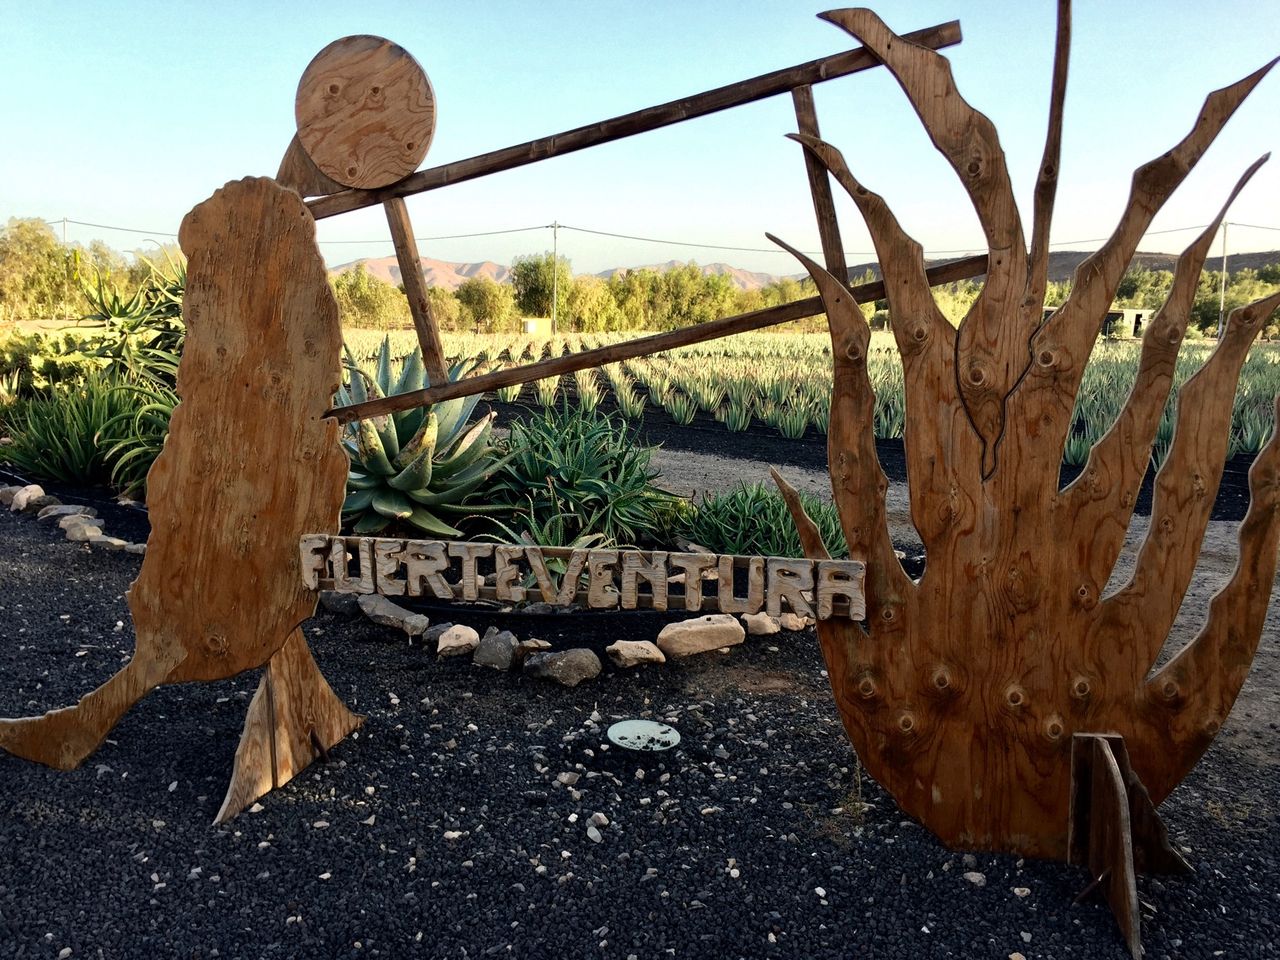 Welcome sign for aloe vera plantation.